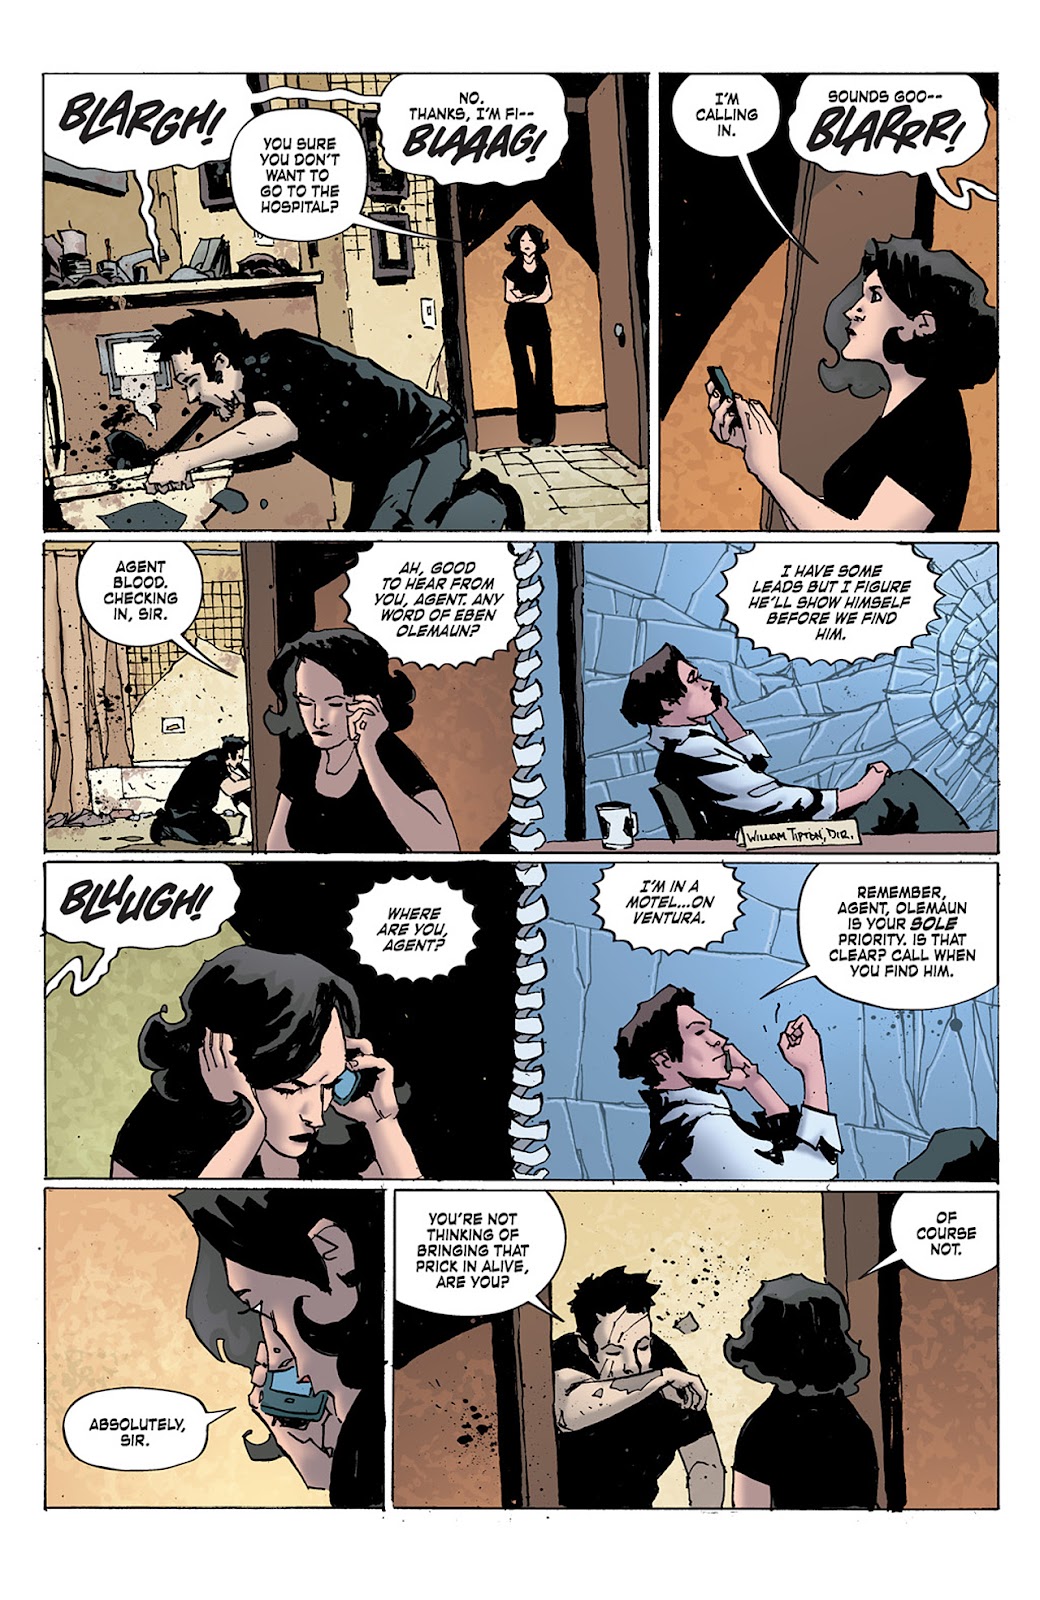 Criminal Macabre: Final Night - The 30 Days of Night Crossover issue 2 - Page 14